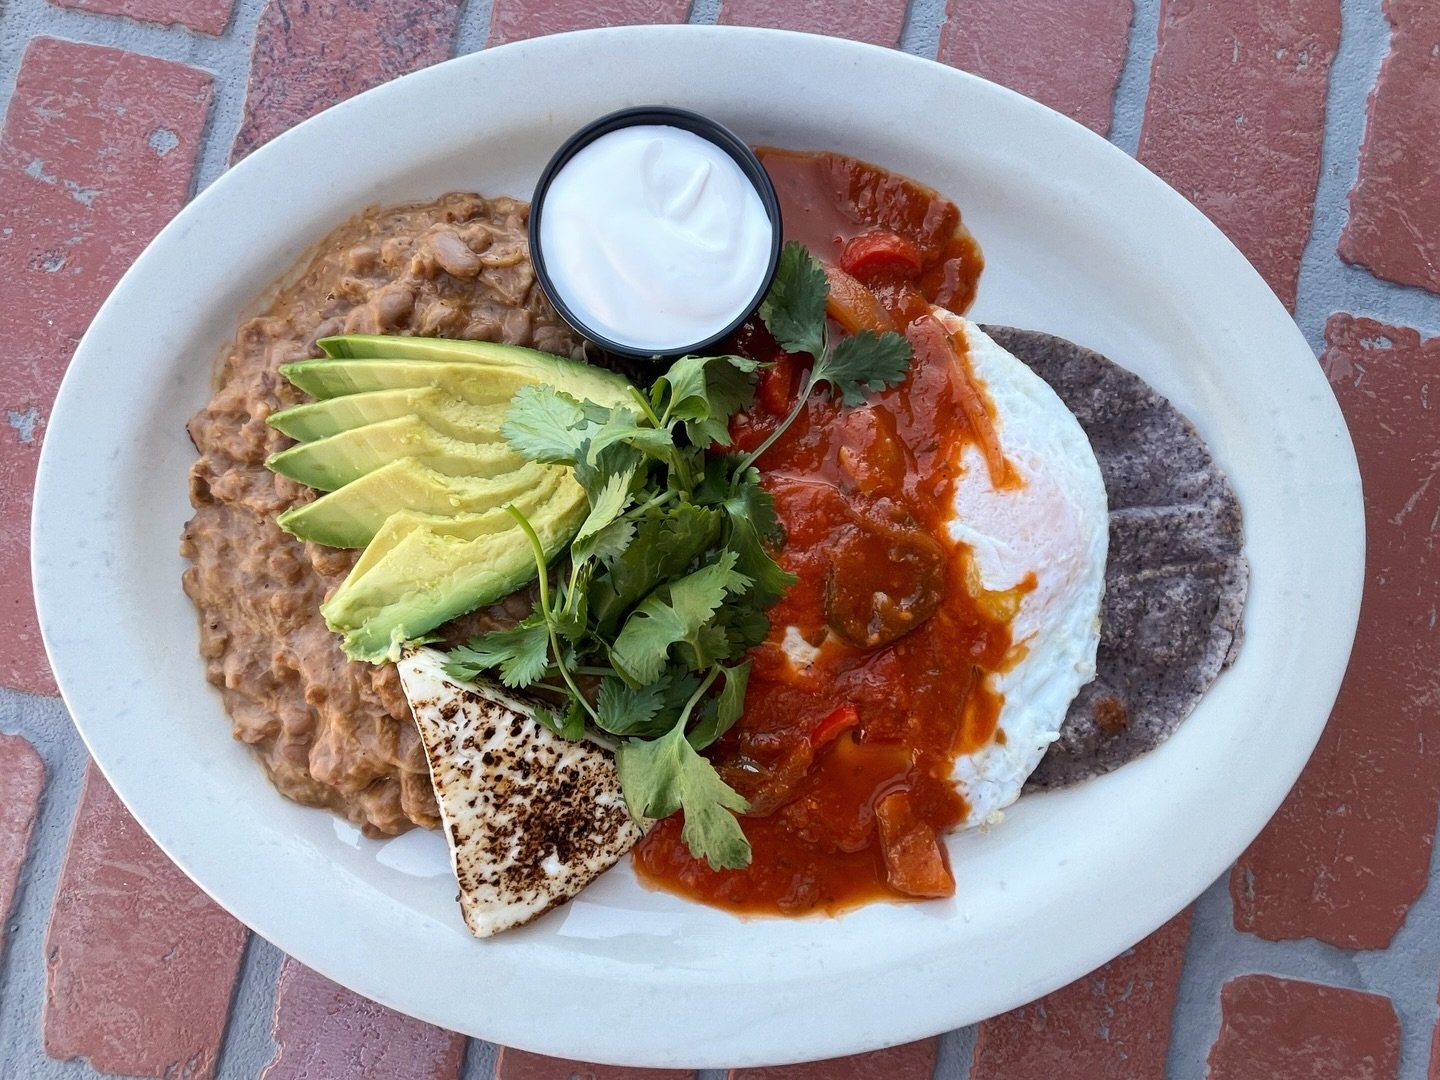 New breakfast special starts today! 🍳 Huevos Rancheros&mdash;El Molino&rsquo;s blue corn tortillas topped with two eggs &amp; salsa ranchera. Served with grilled panela, frijoles puercos, avocado, cilantro and sour cream.